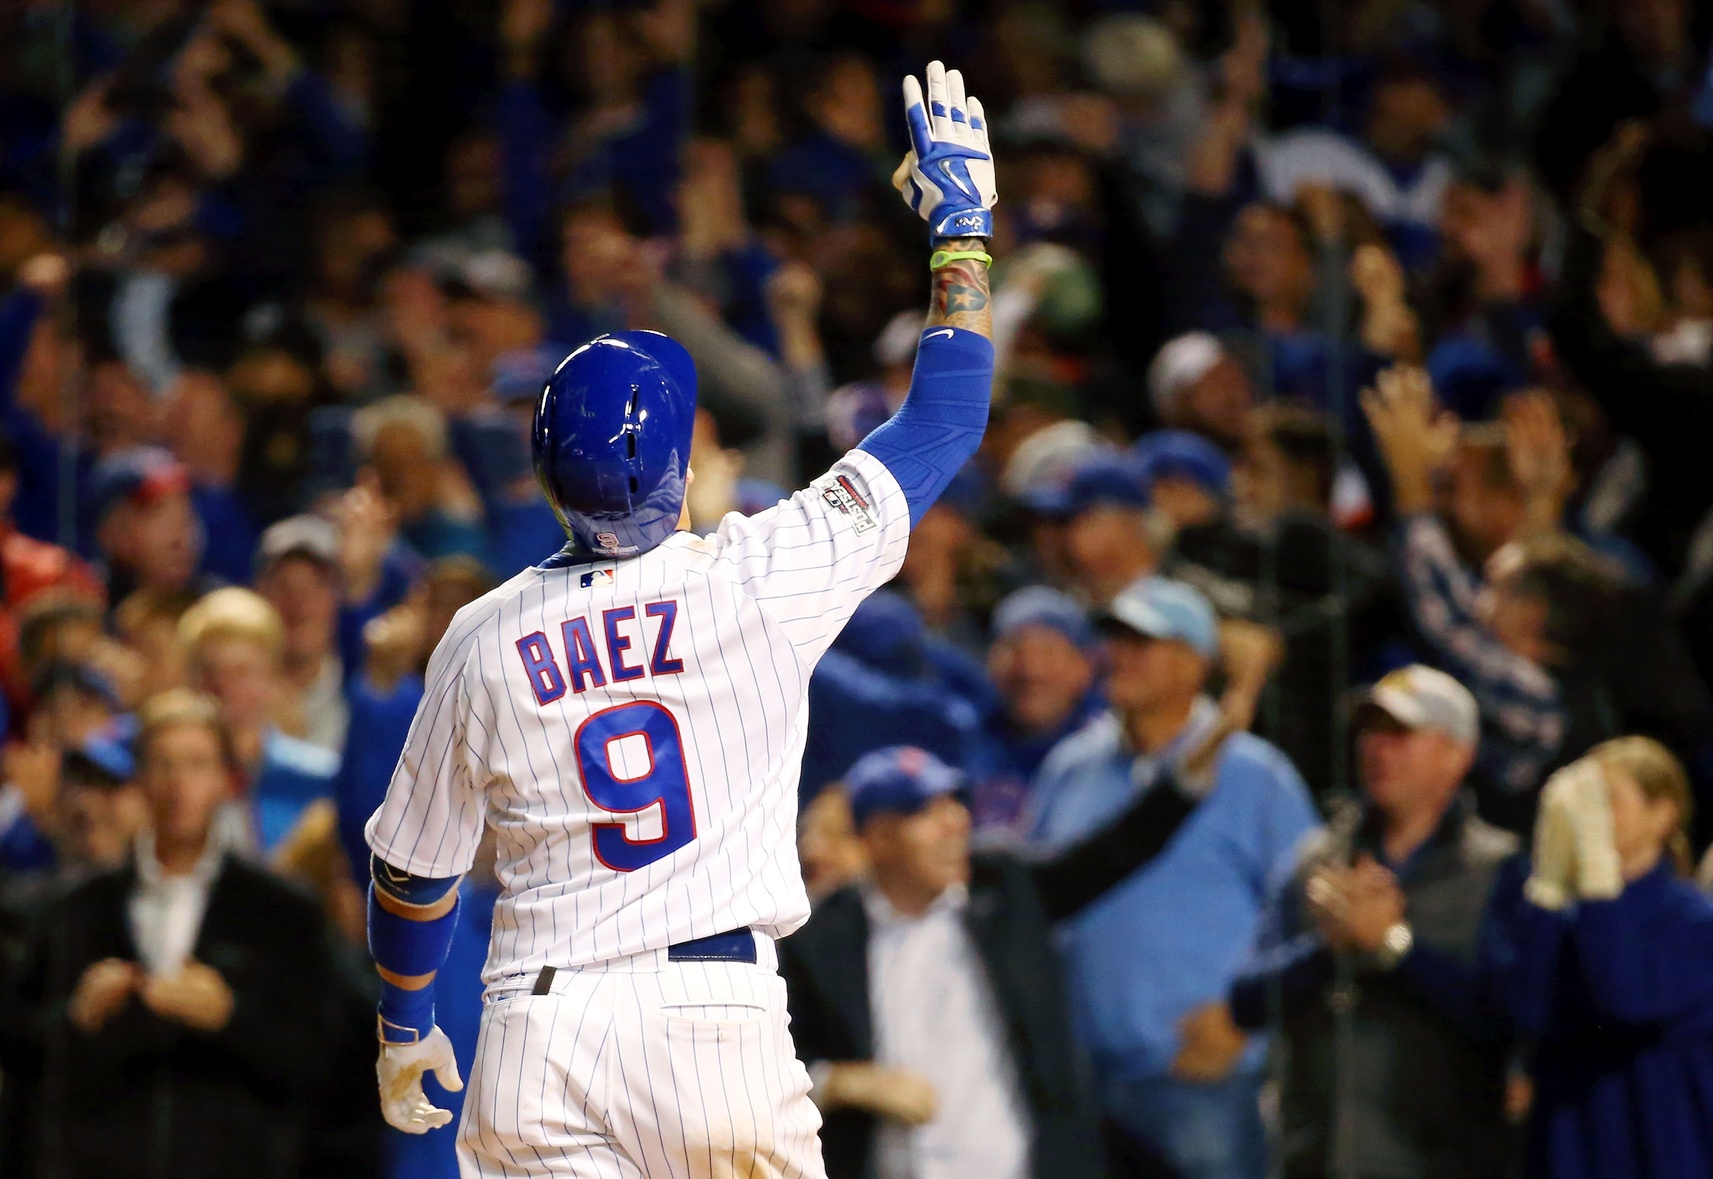 Cubs seize 2-0 NLDS lead on Giants